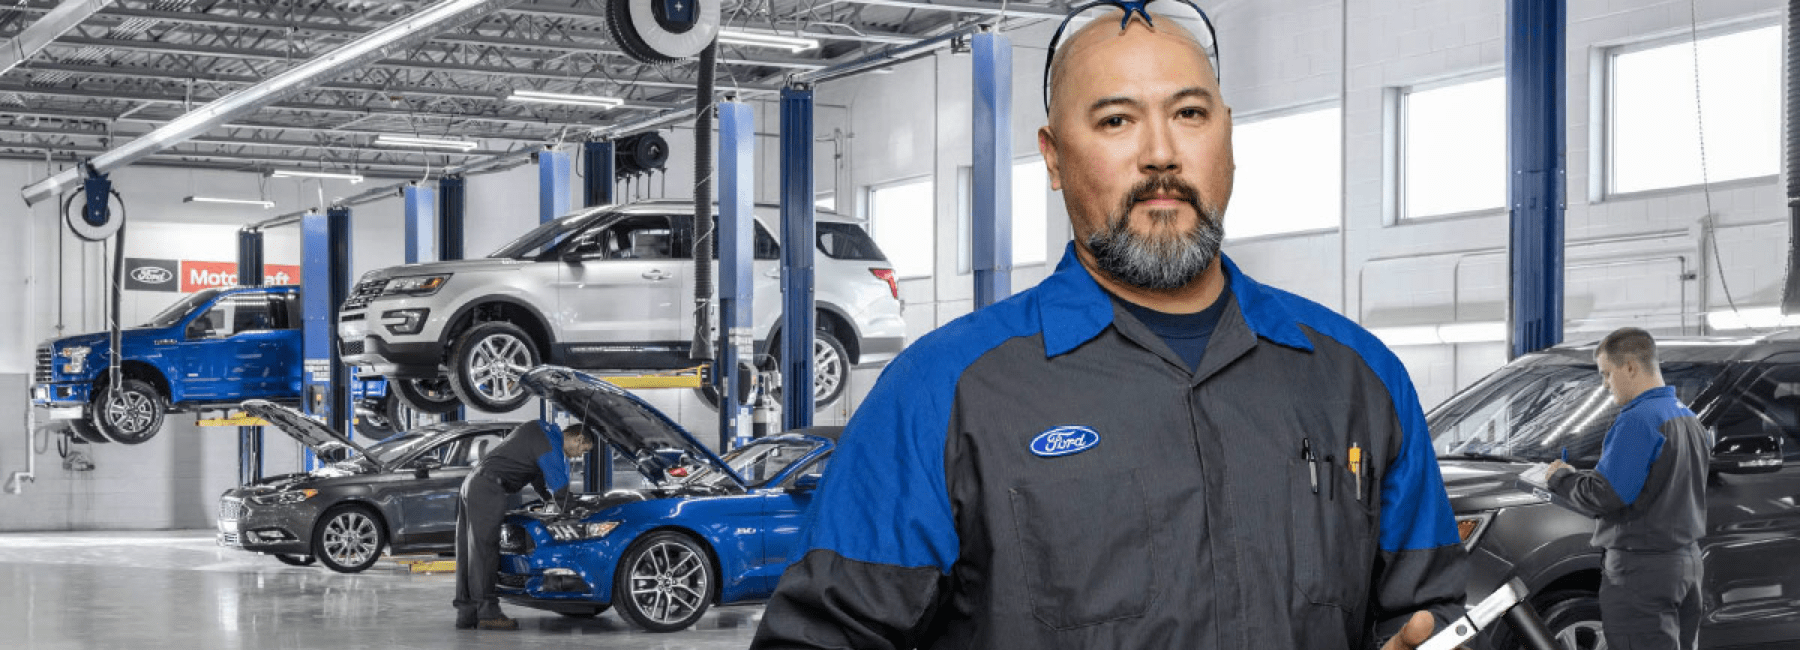 ford-service-technicians-in-service-bay